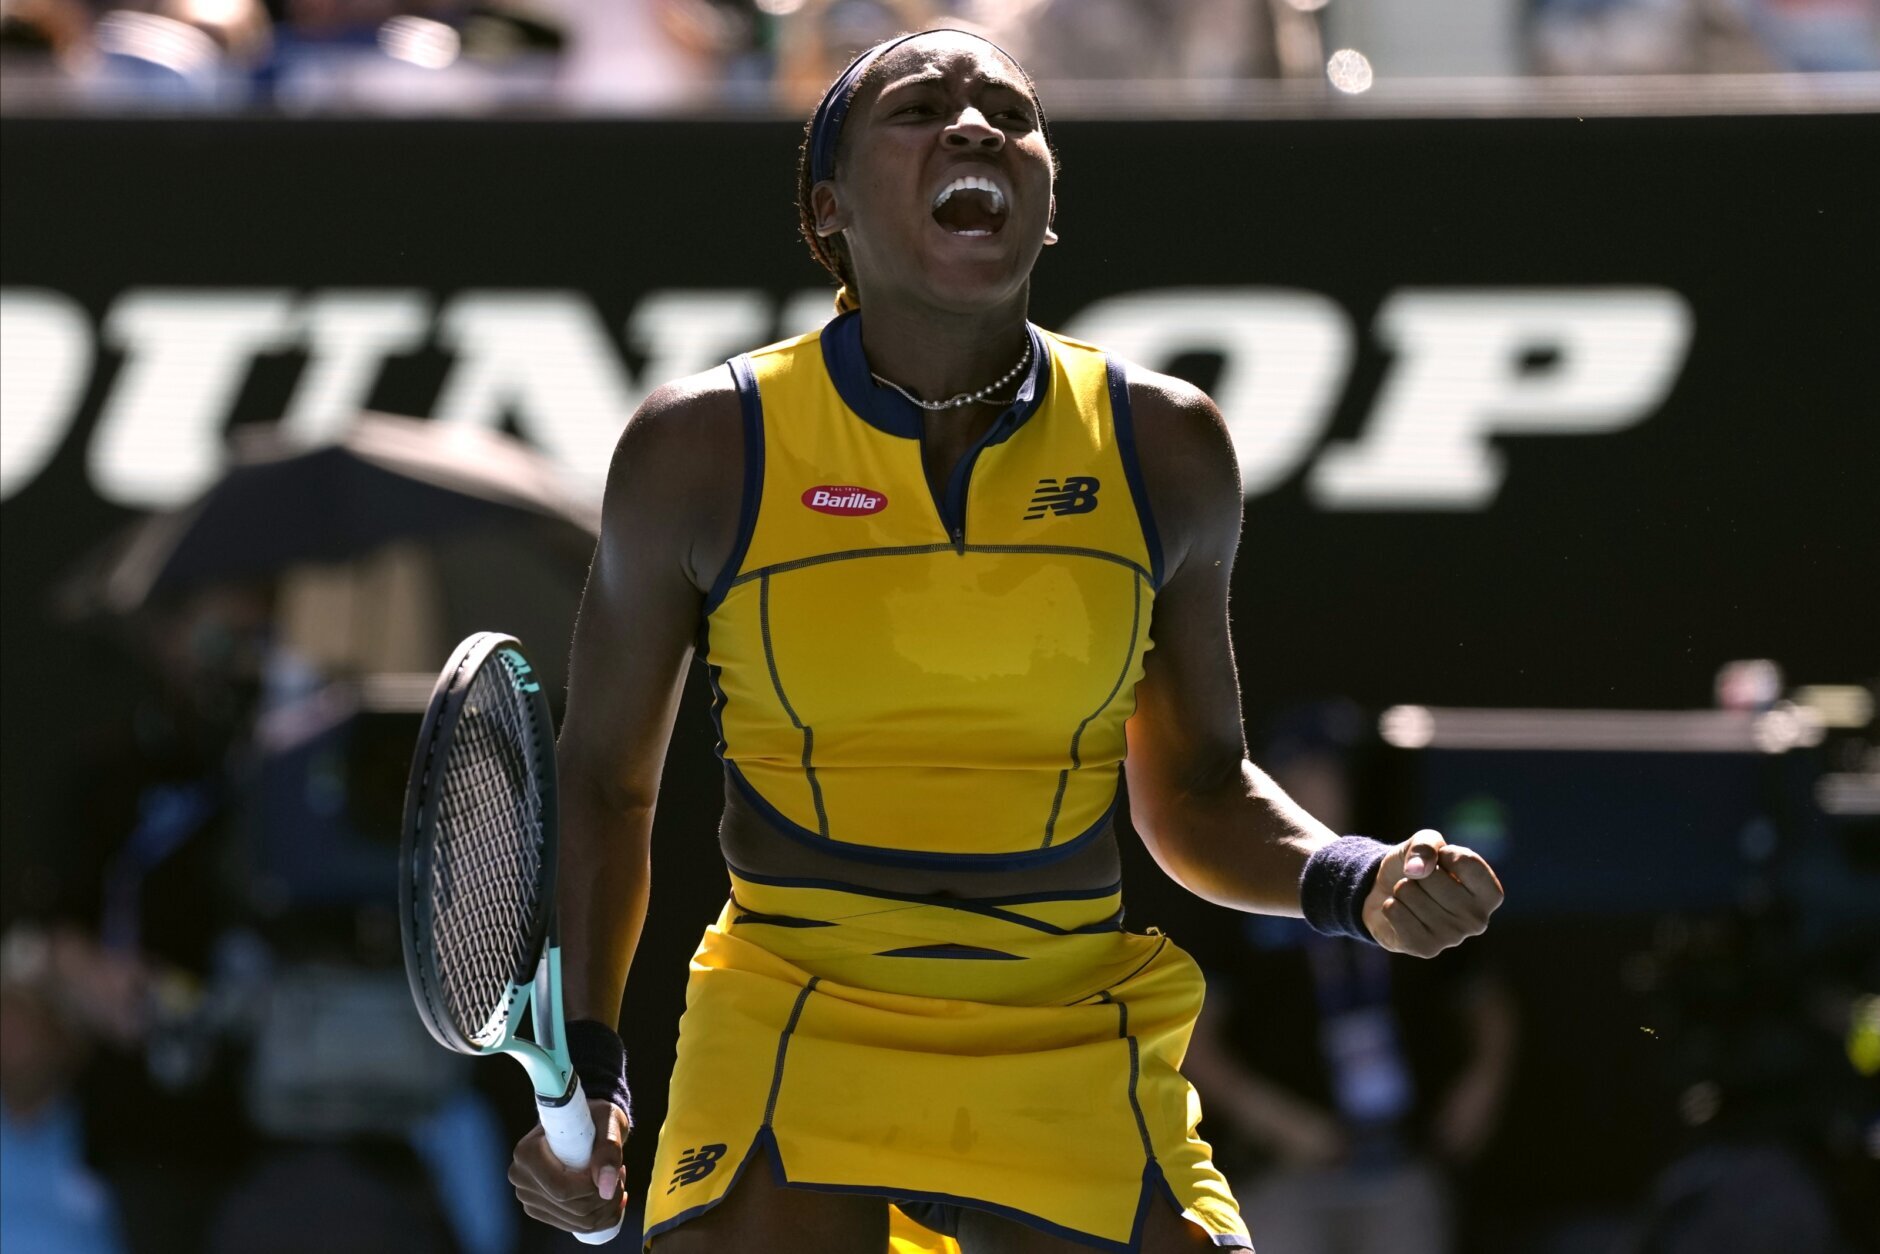 Coco Gauff on Chasing Her First Grand Slam Title at the US Open